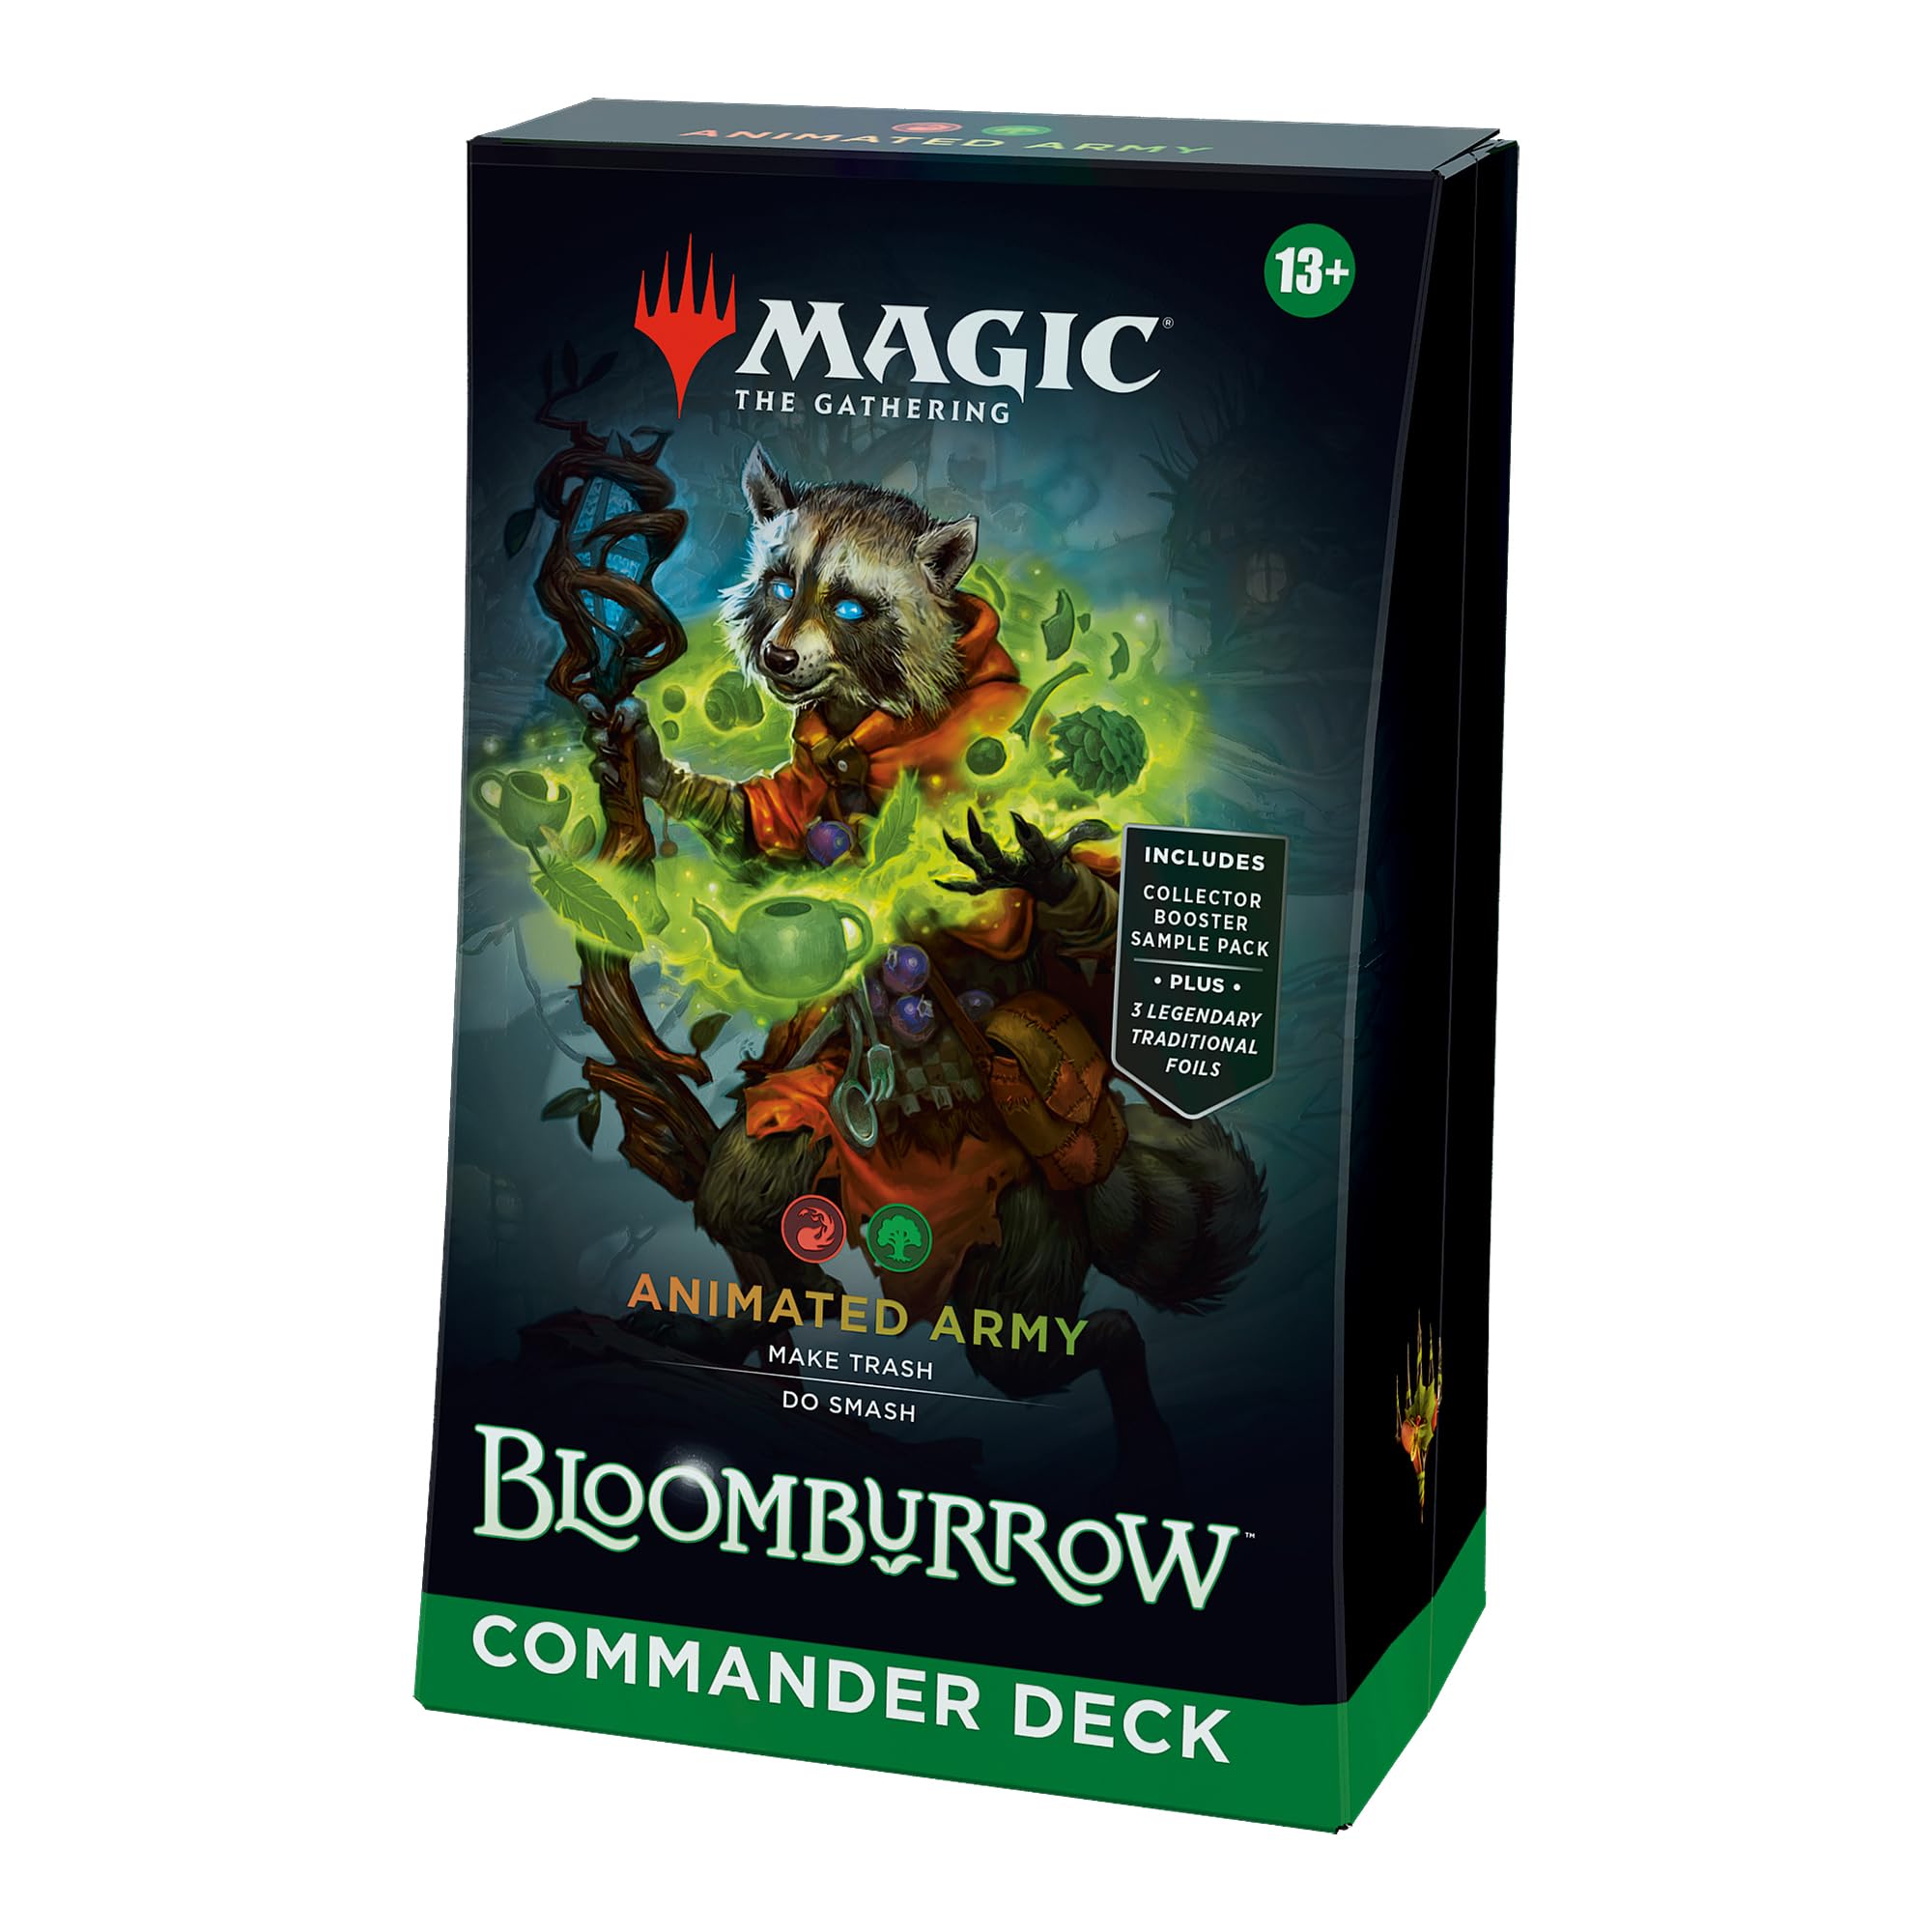 Magic: The Gathering Bloomburrow Commander Deck - Animated Army (100-Card Deck, 2-Card Collector Booster Sample Pack + Accessories)